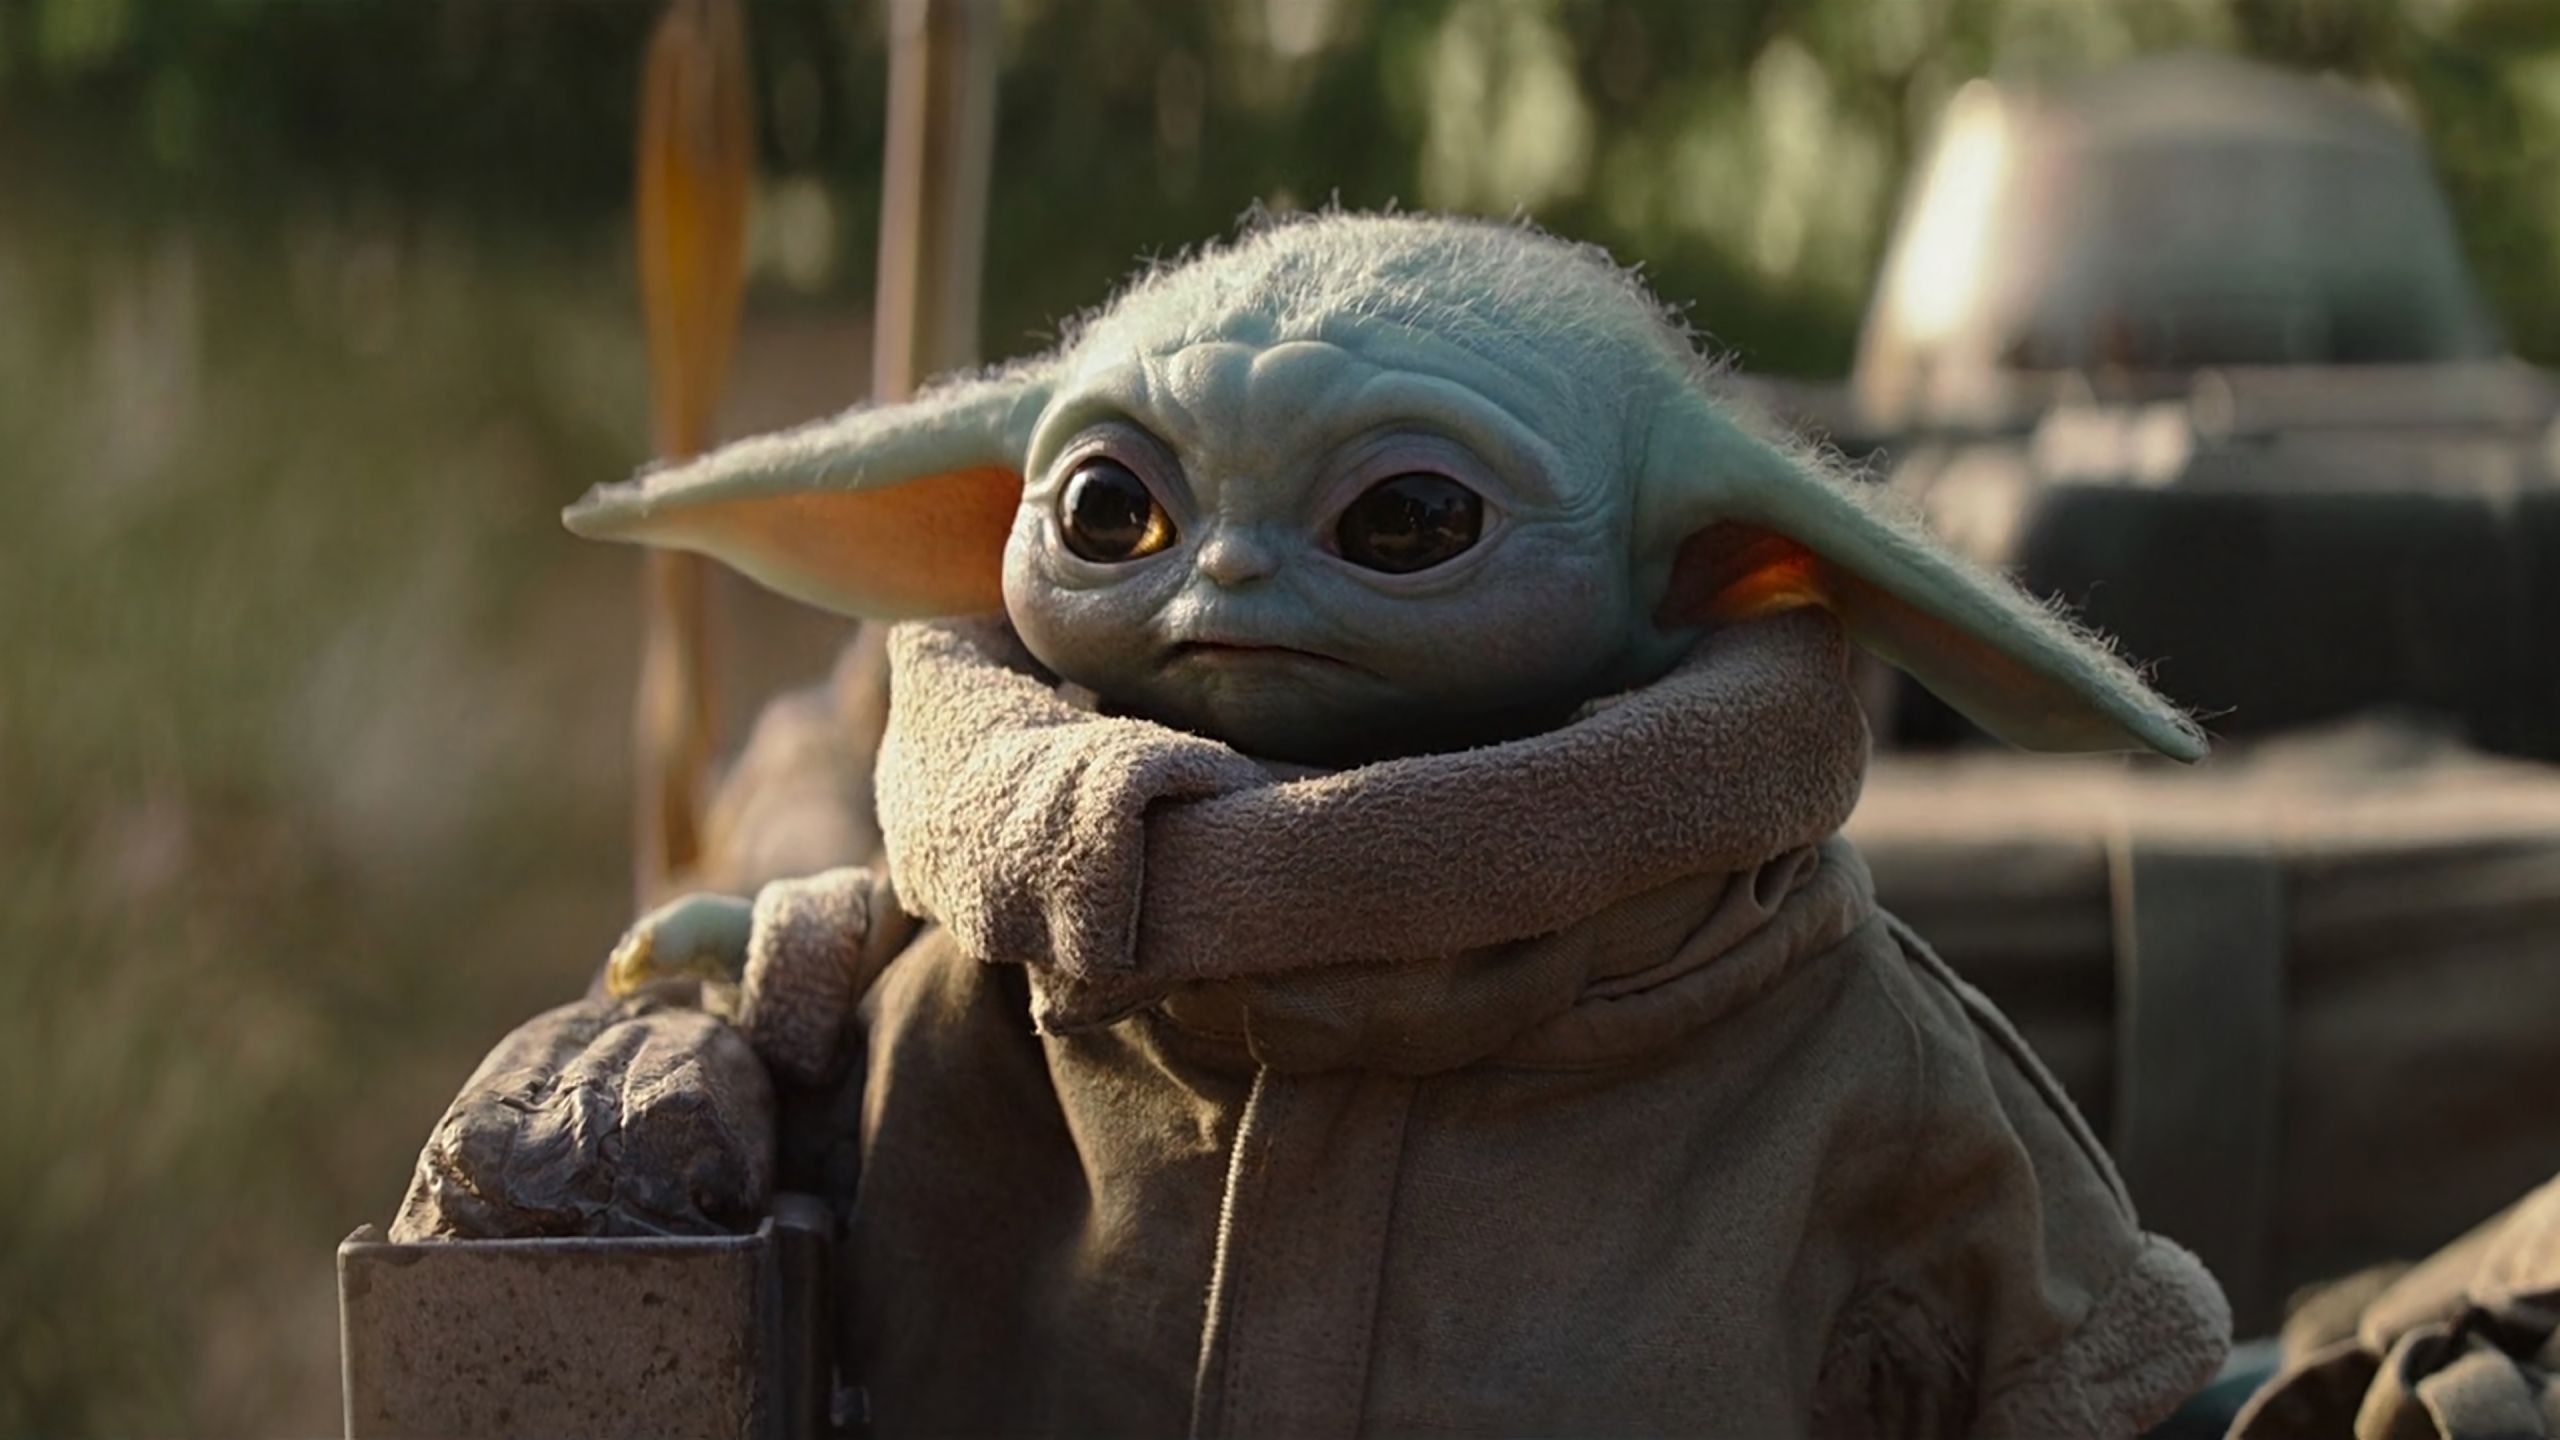 Baby Yoda, the cutest character in the Star Wars universe, is a big hit with fans. - Baby Yoda